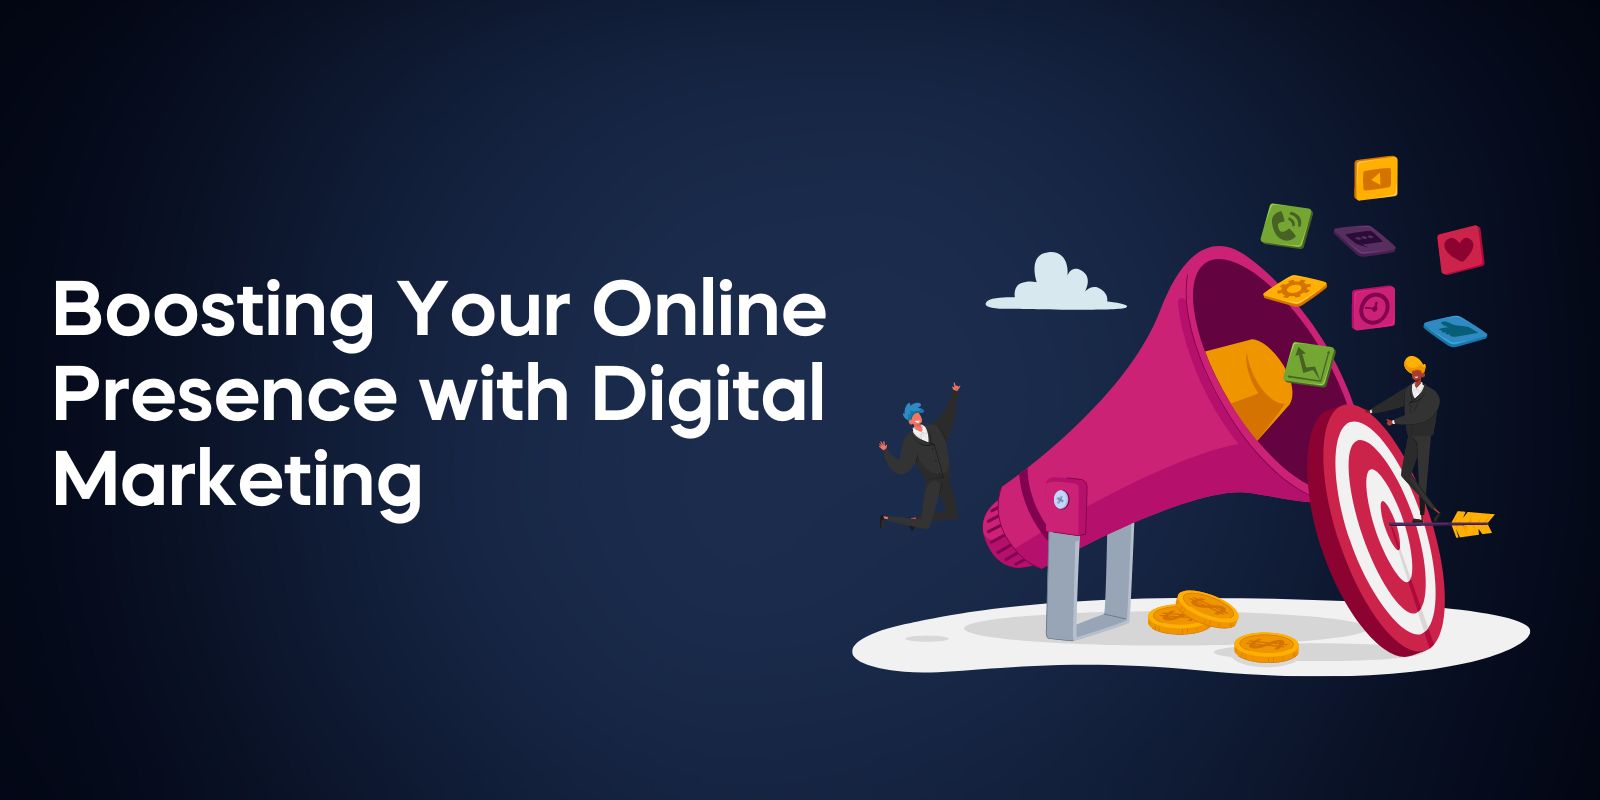 Boosting Your Online Presence with Digital Marketing